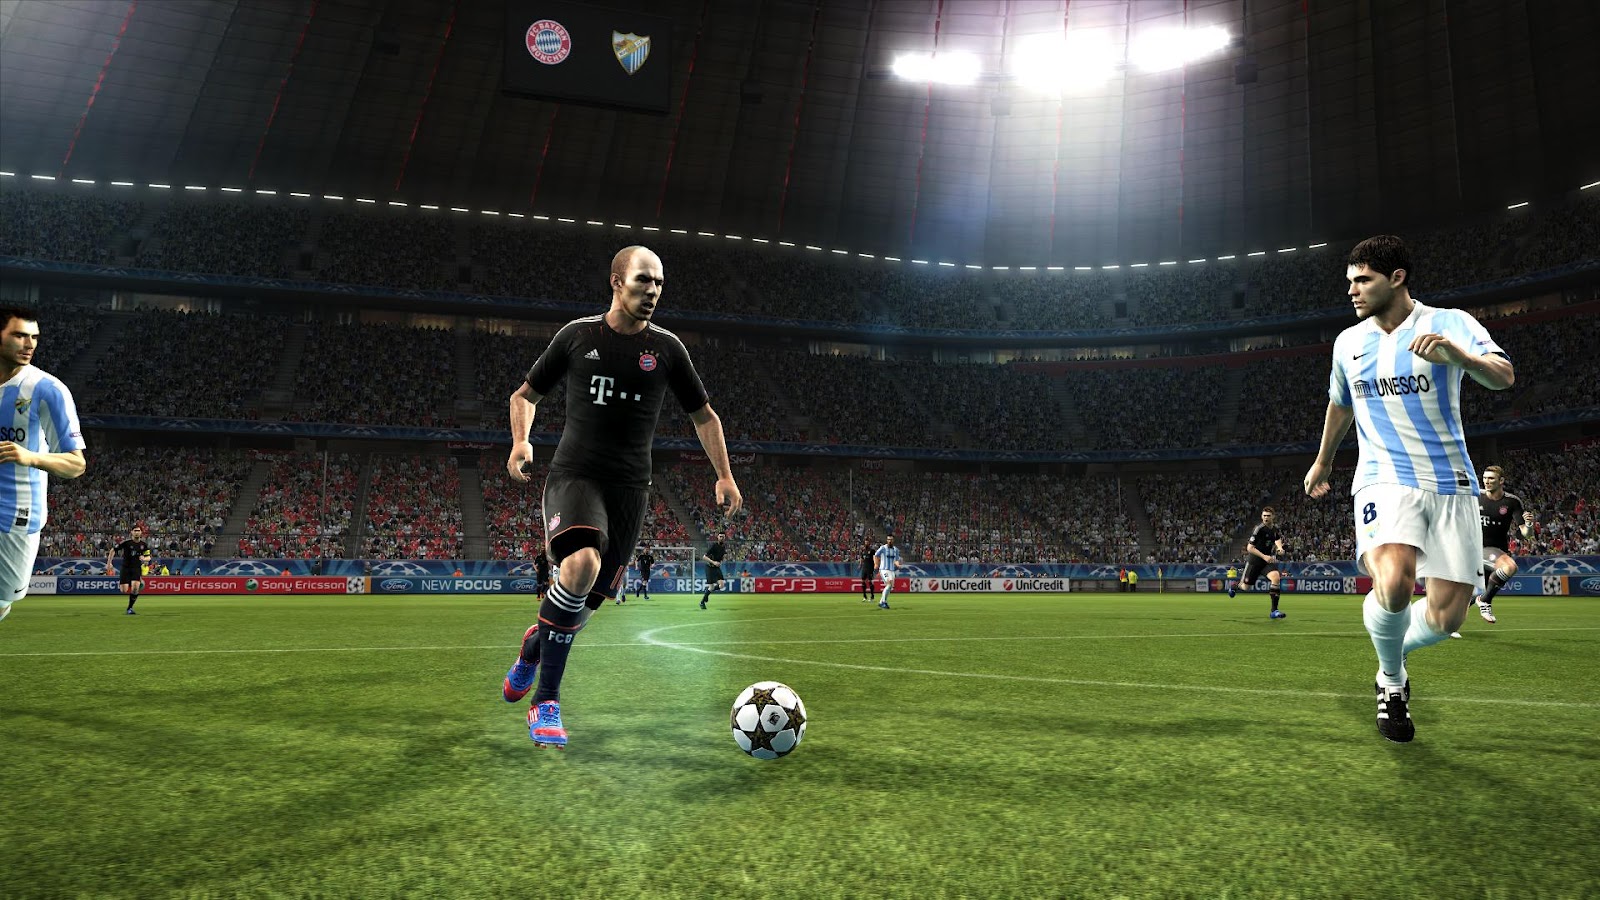 PES 2012 - PESEdit patch 41 - Showcase PC/HD - YouTube